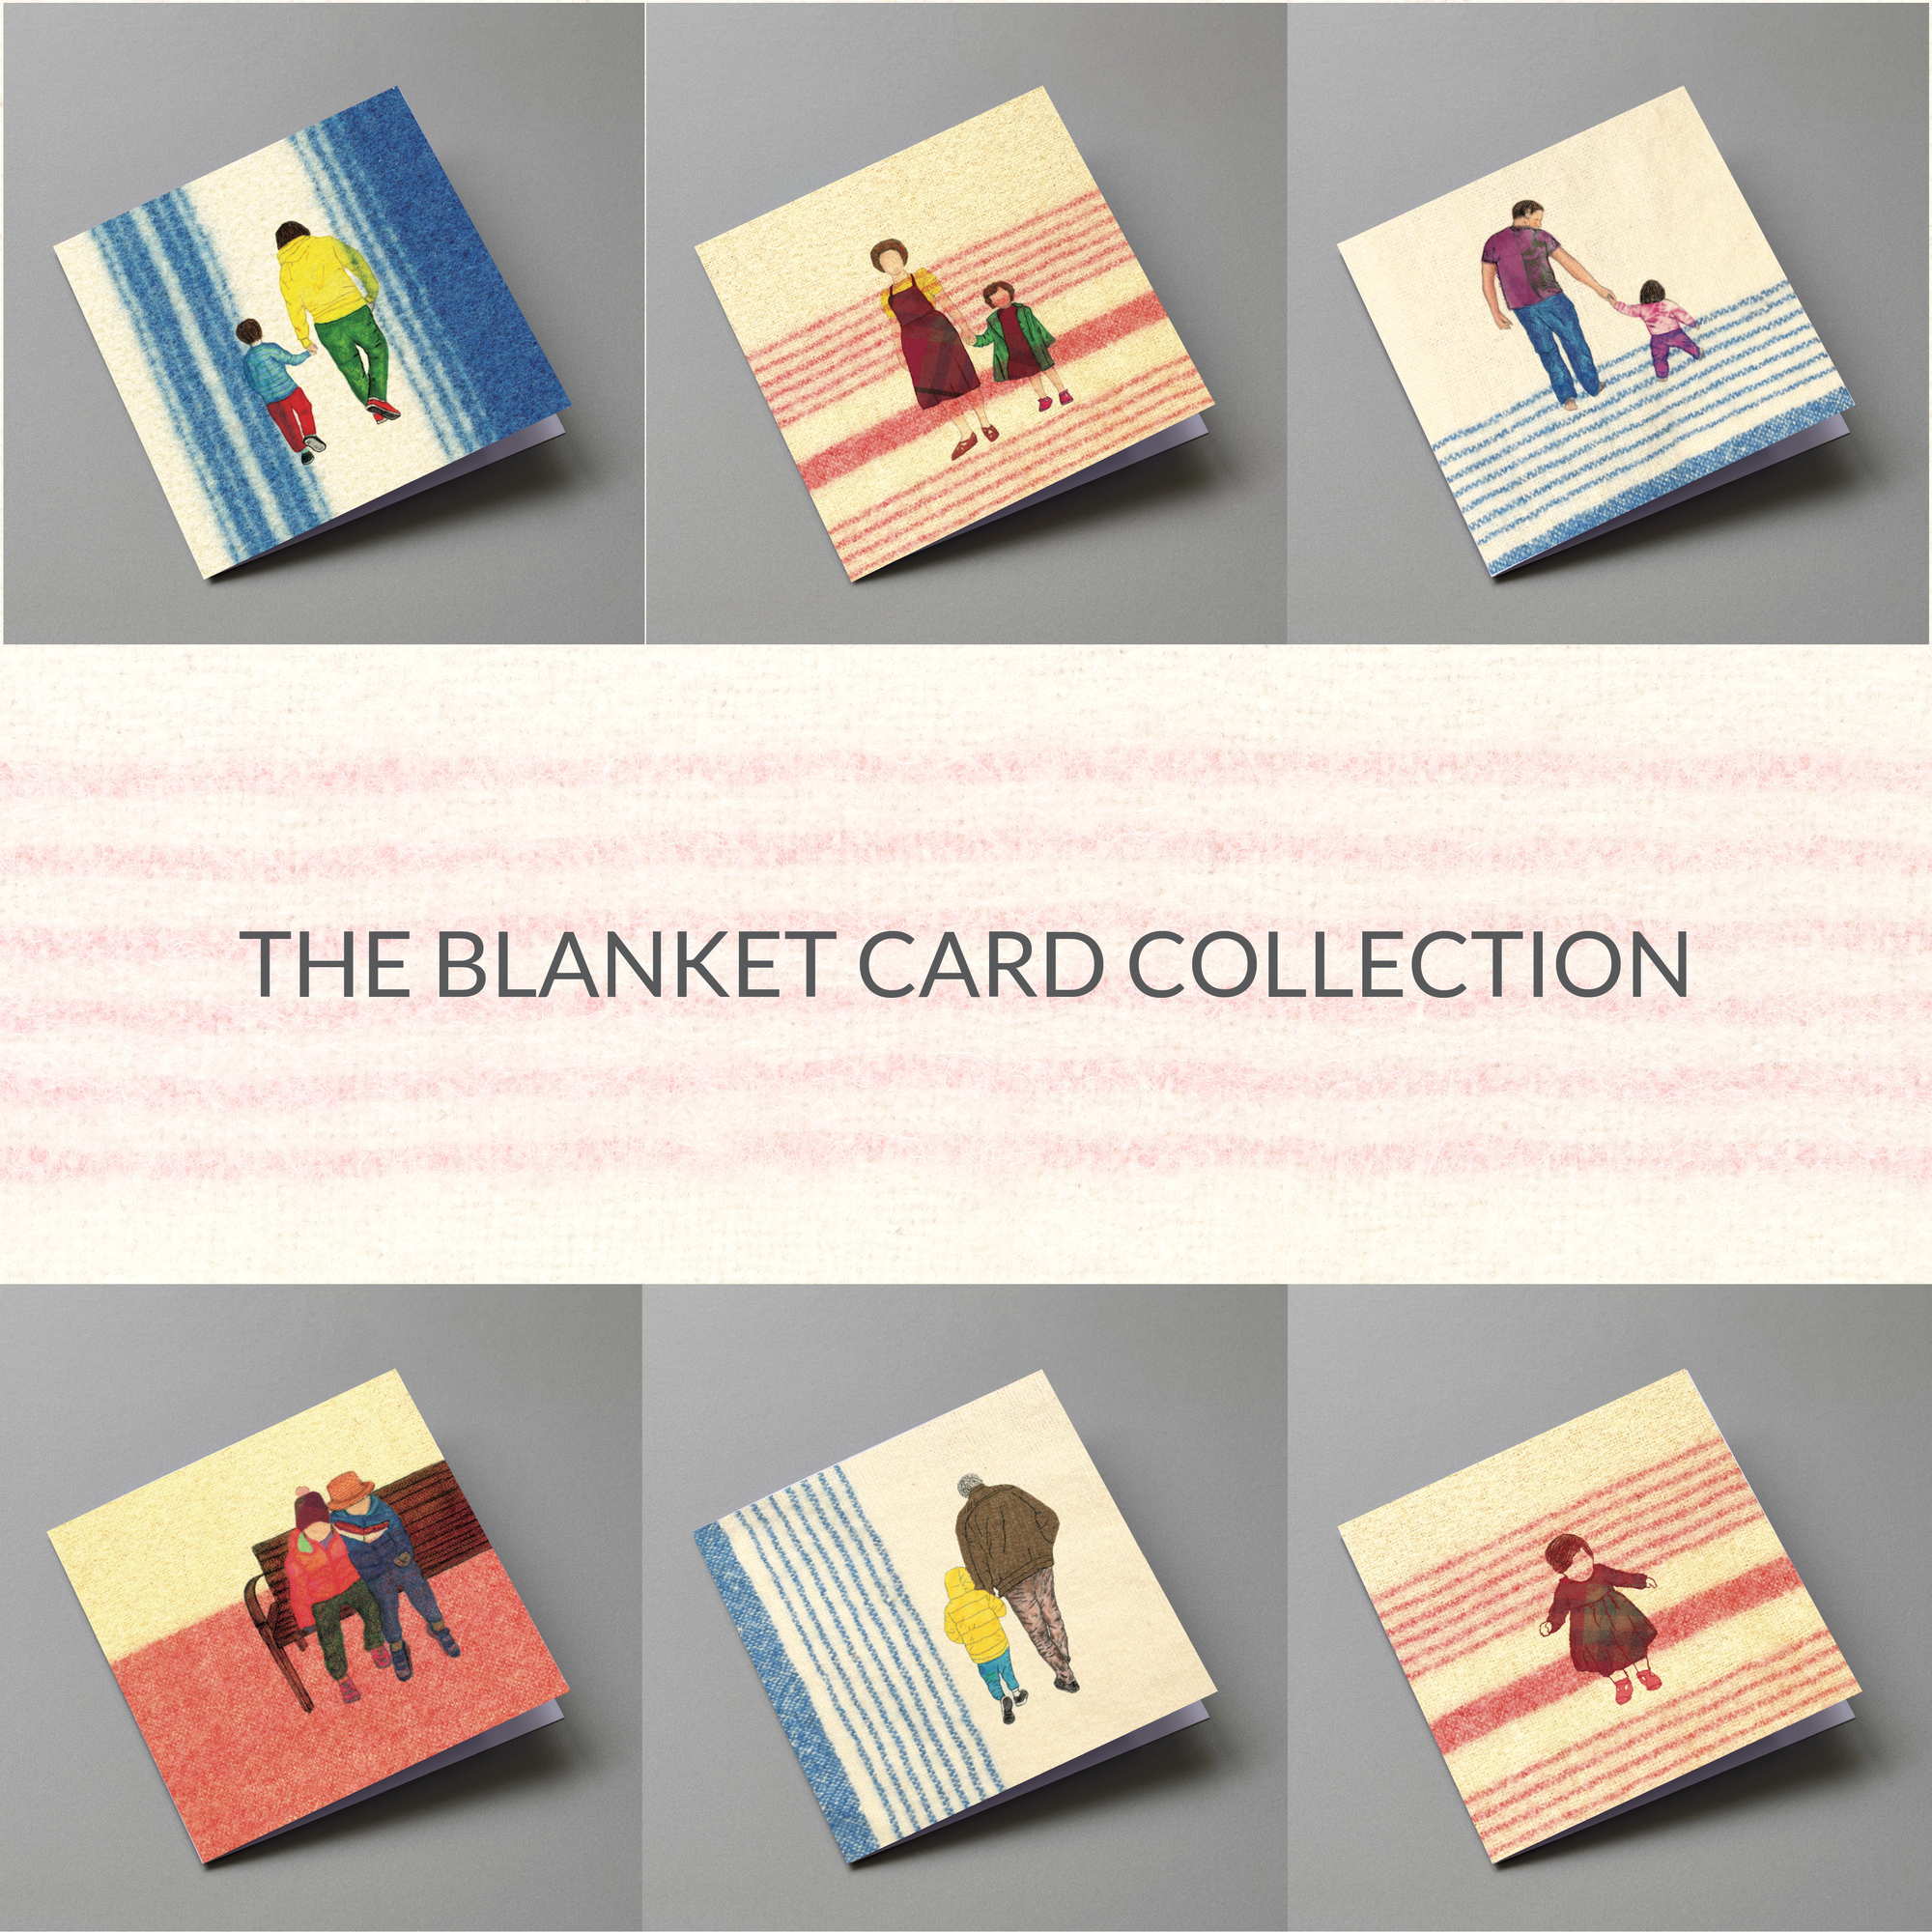 The Blanket Card Collection